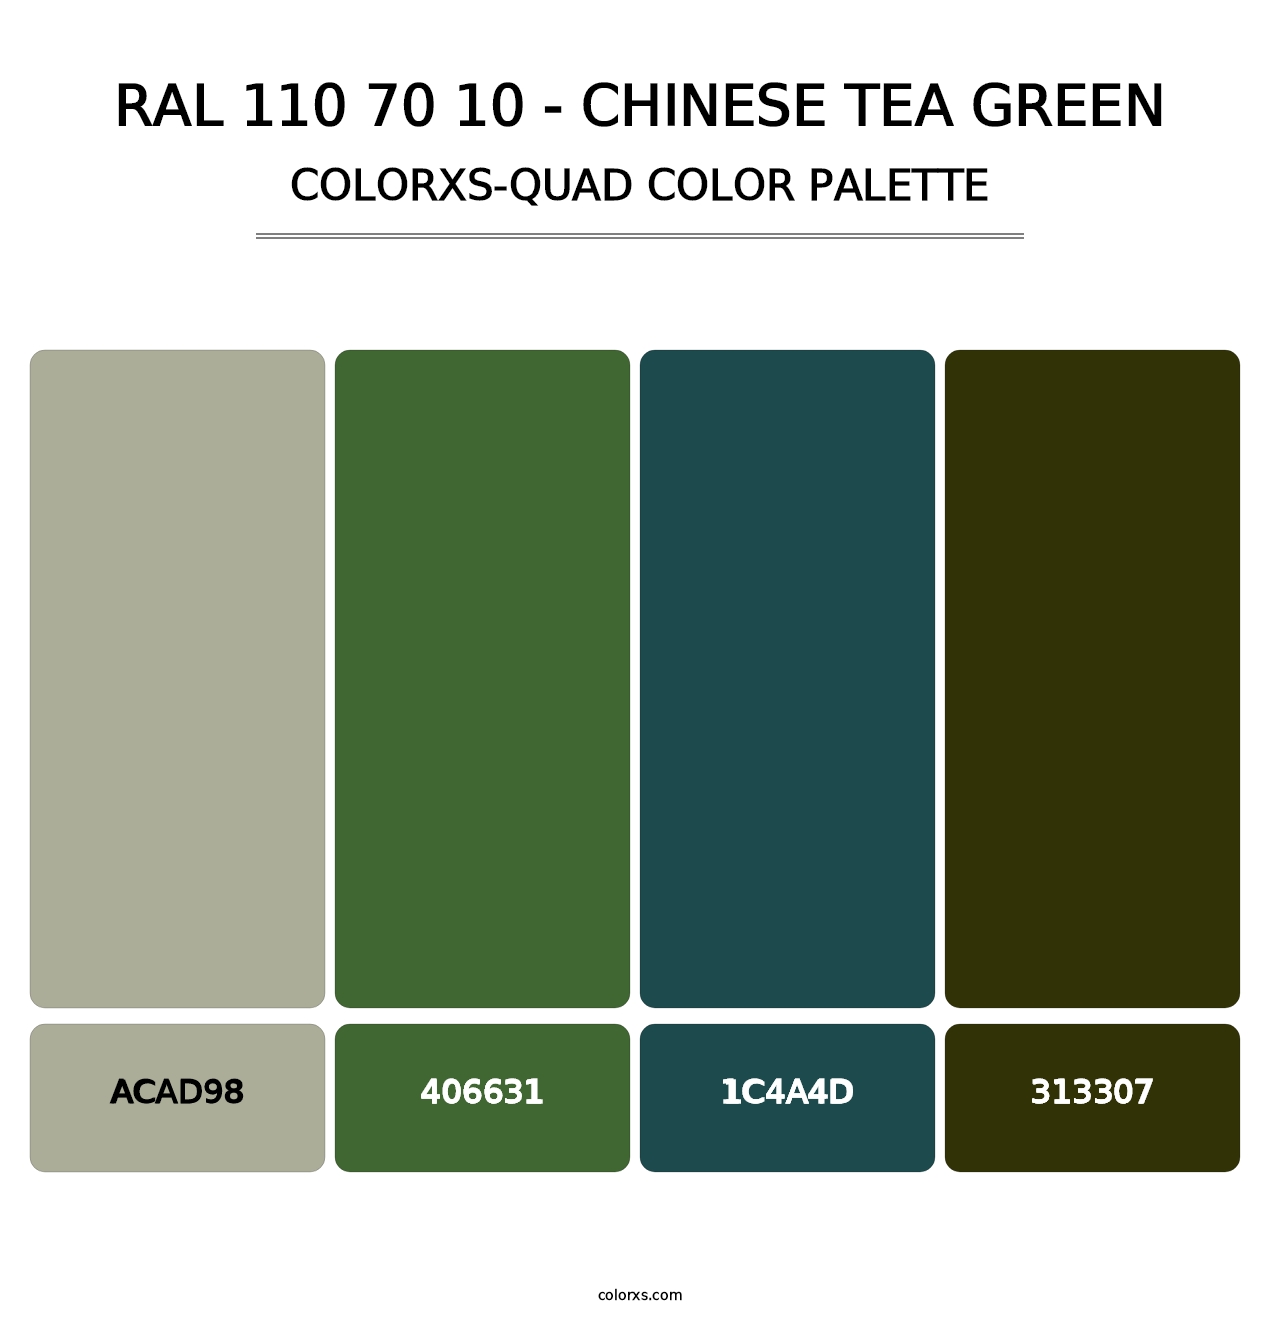 RAL 110 70 10 - Chinese Tea Green - Colorxs Quad Palette